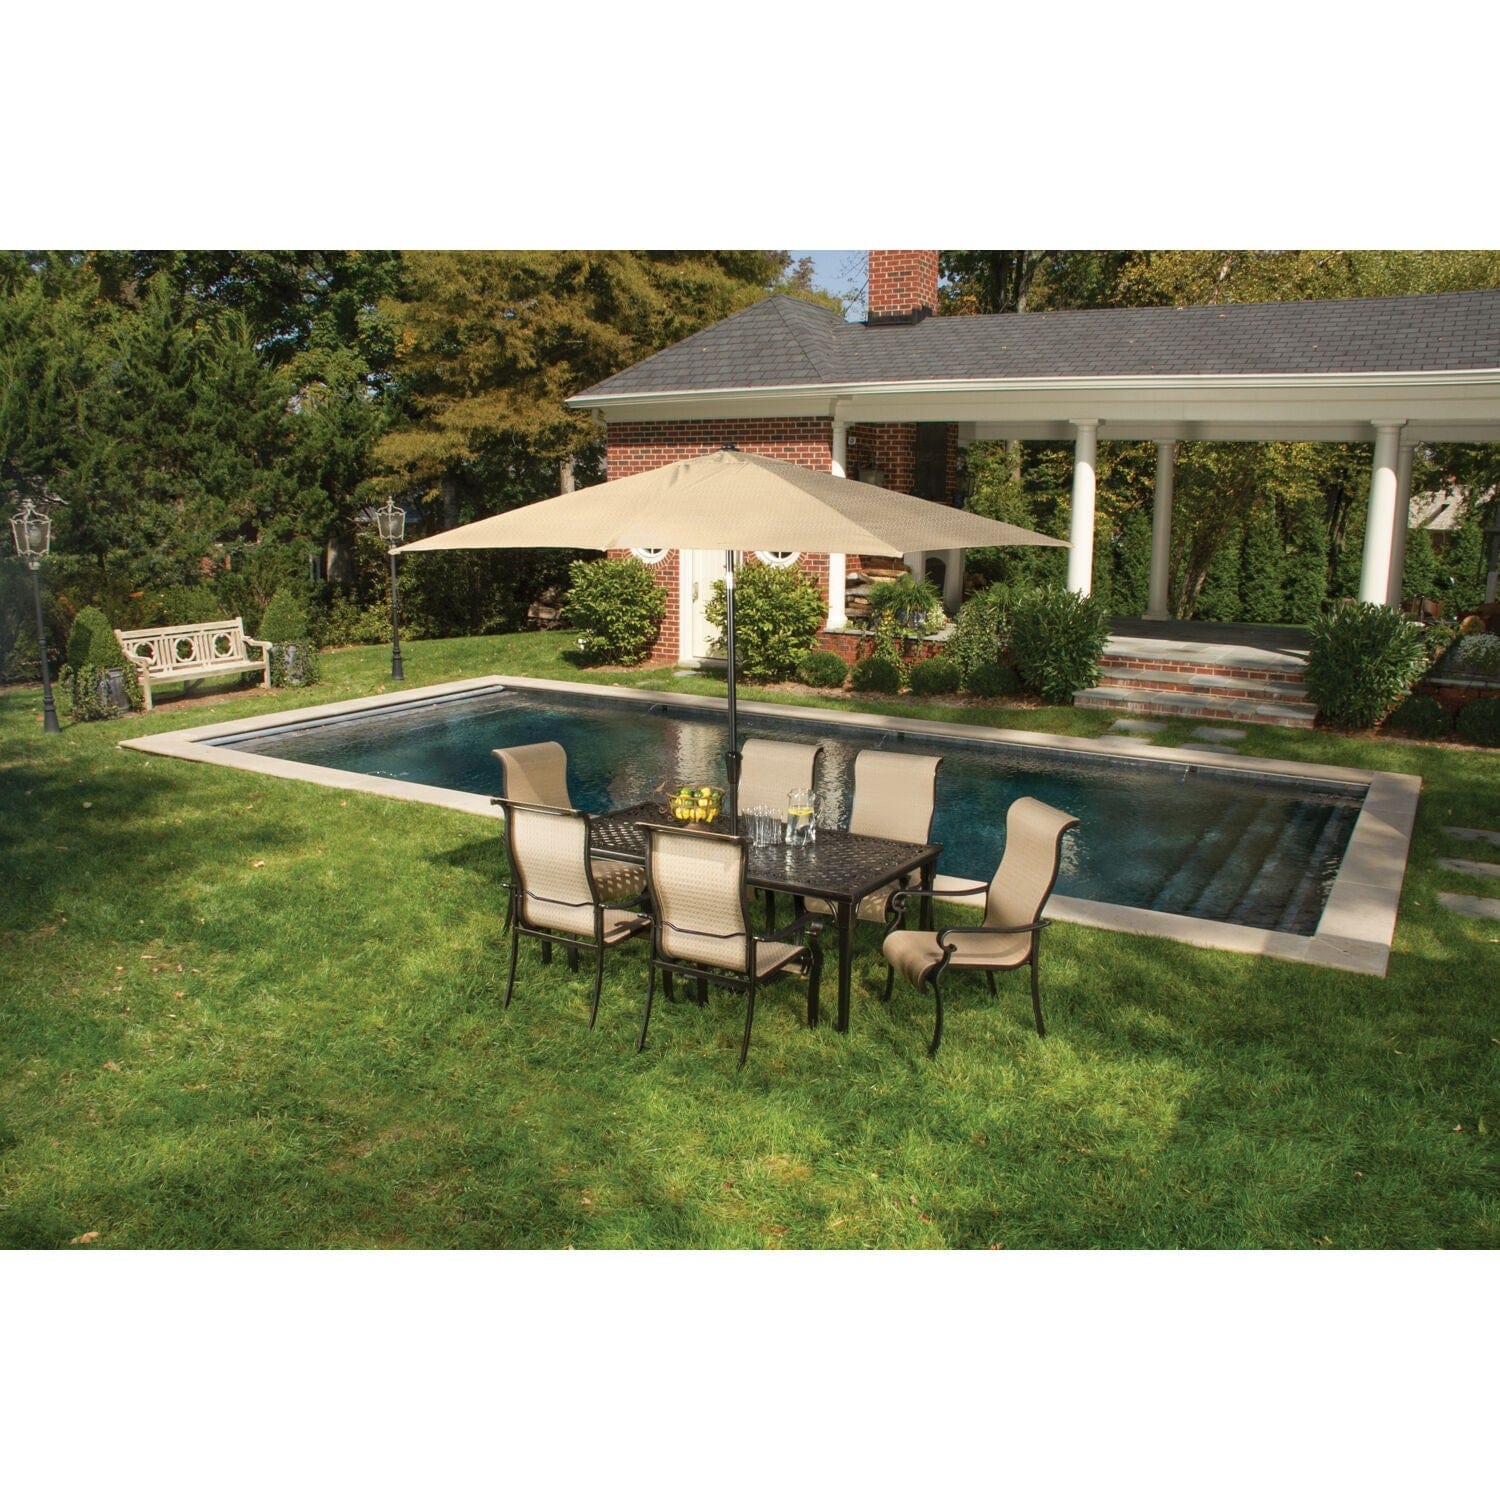 Hanover Outdoor Dining Set Hanover Brigantine 7 Piece Outoor Dining Set with Cast-Top Table and 9 Ft. Umbrella | Aluminum Table | 6 Chairs | Base - Tan/Cast Aluminum | BRIGDN7PC-SU